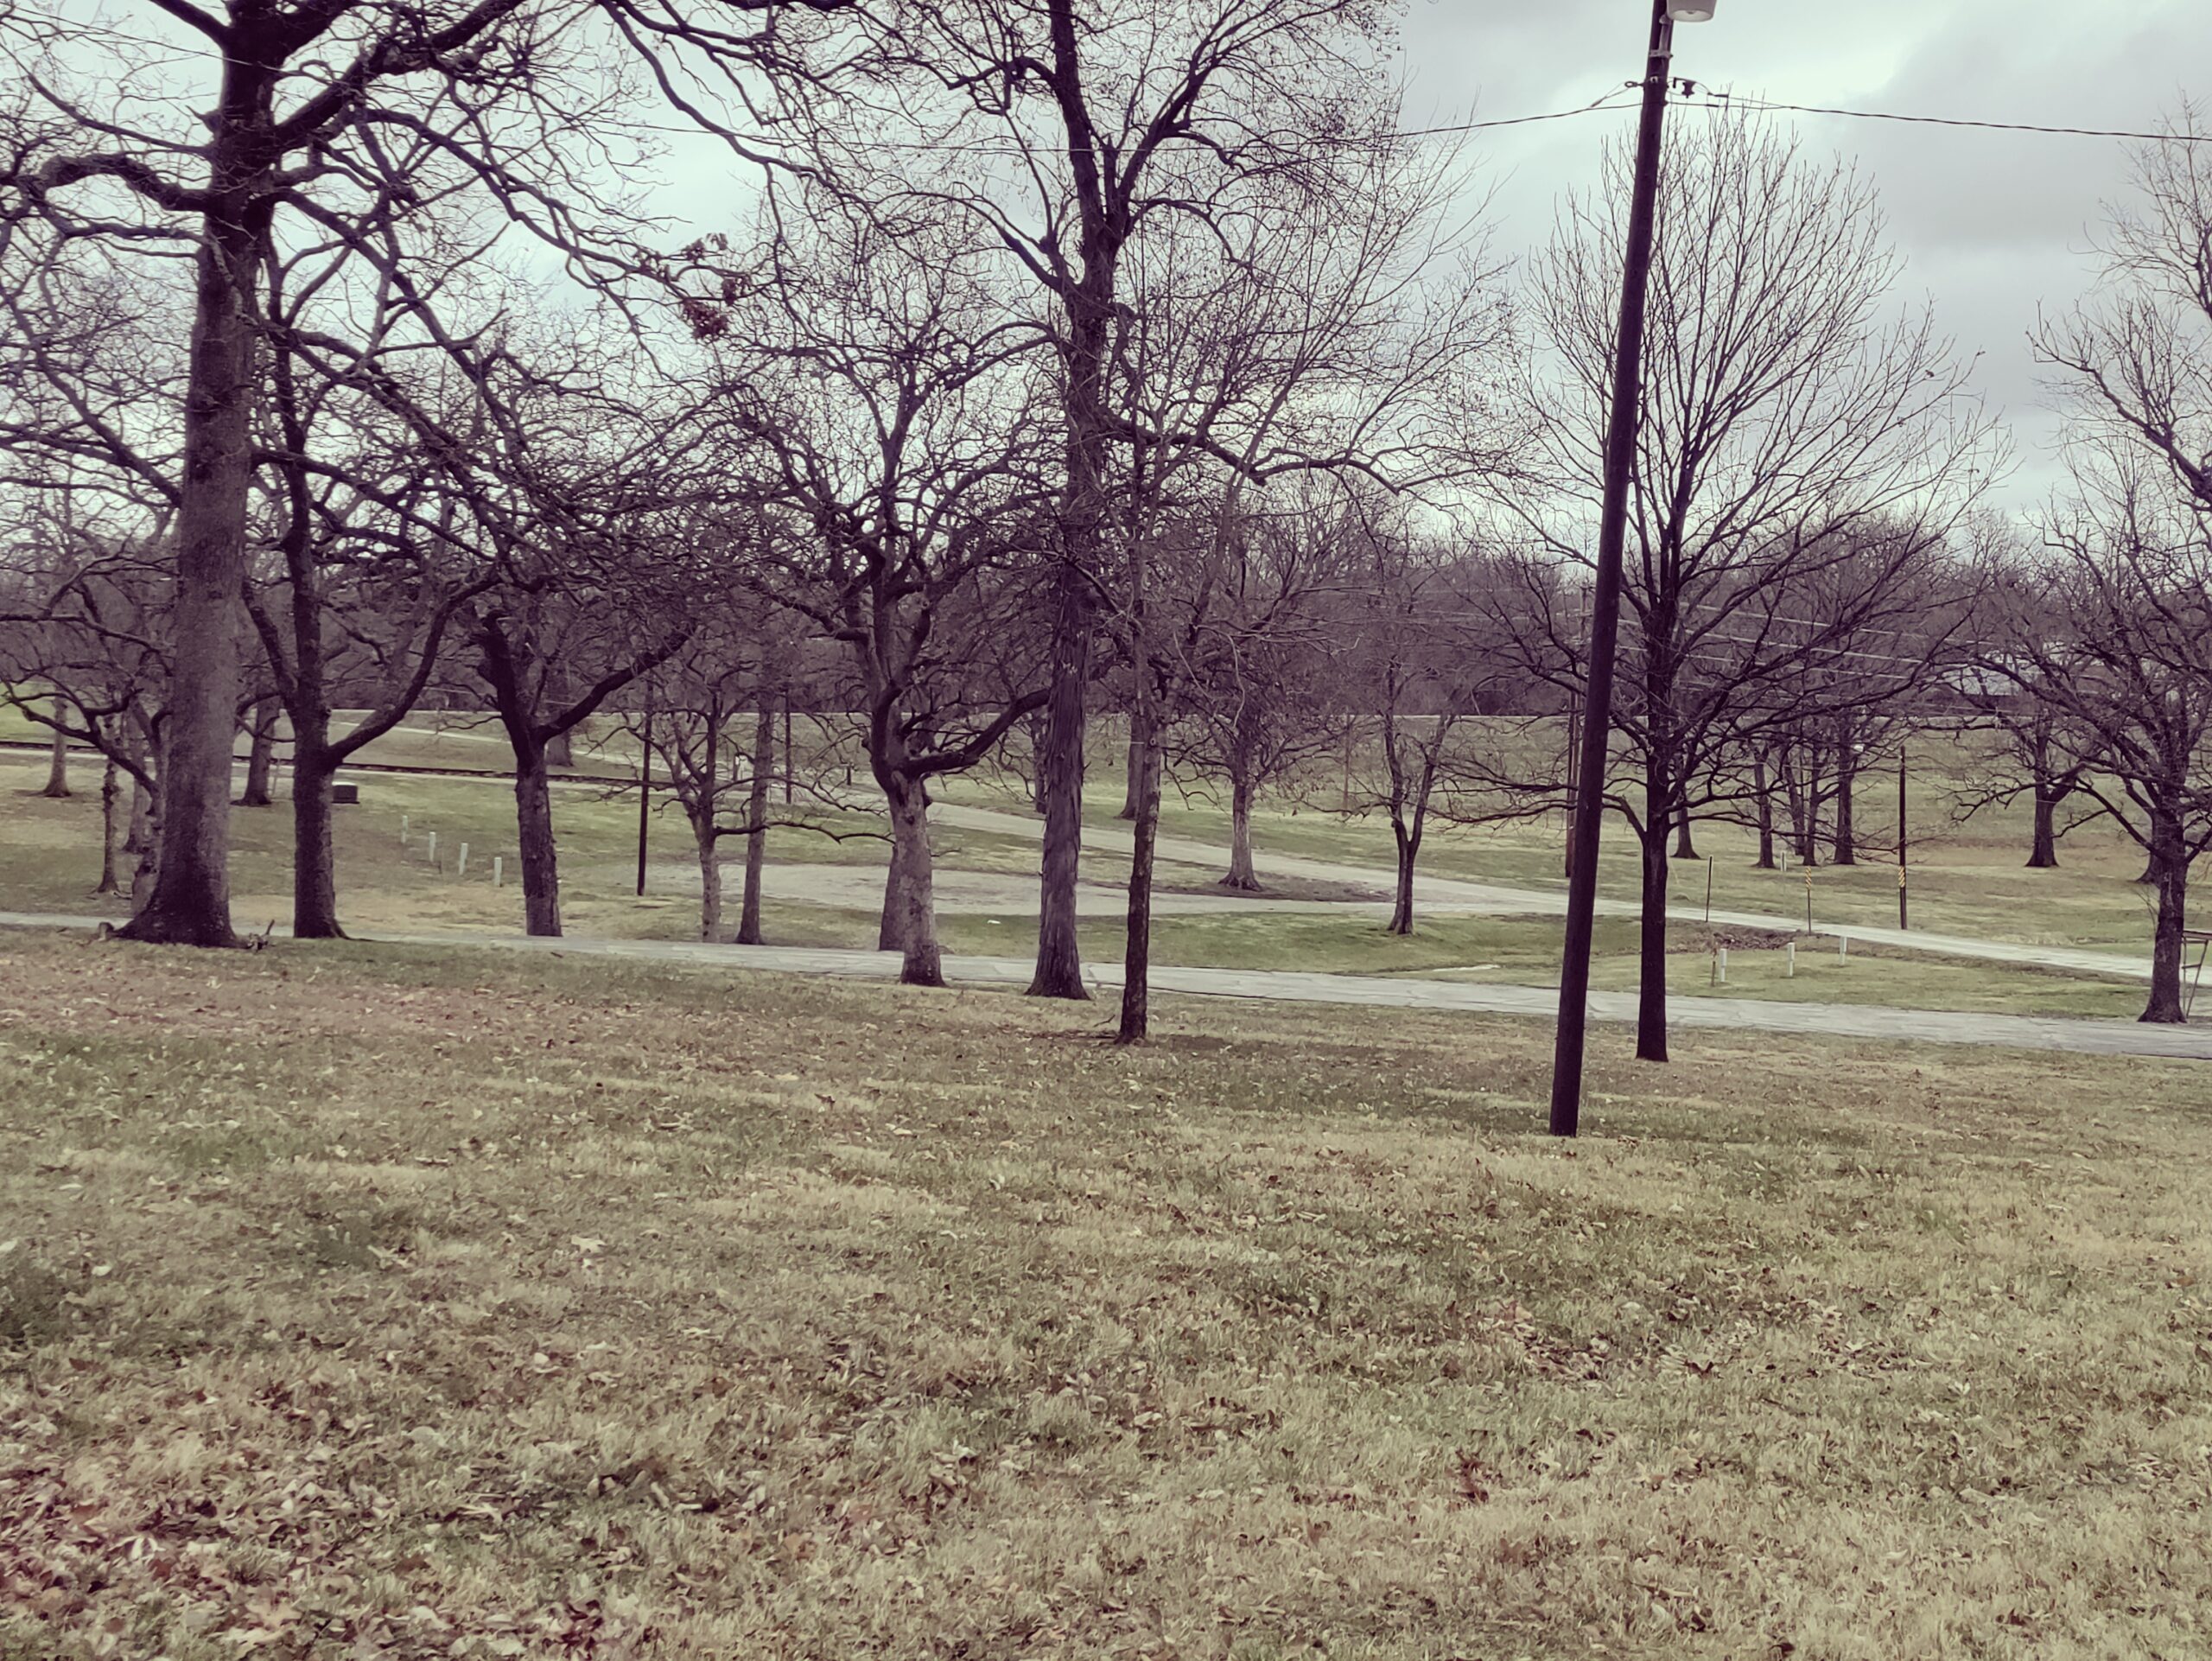 John Brown Park, site of the Battle of Osawatomie